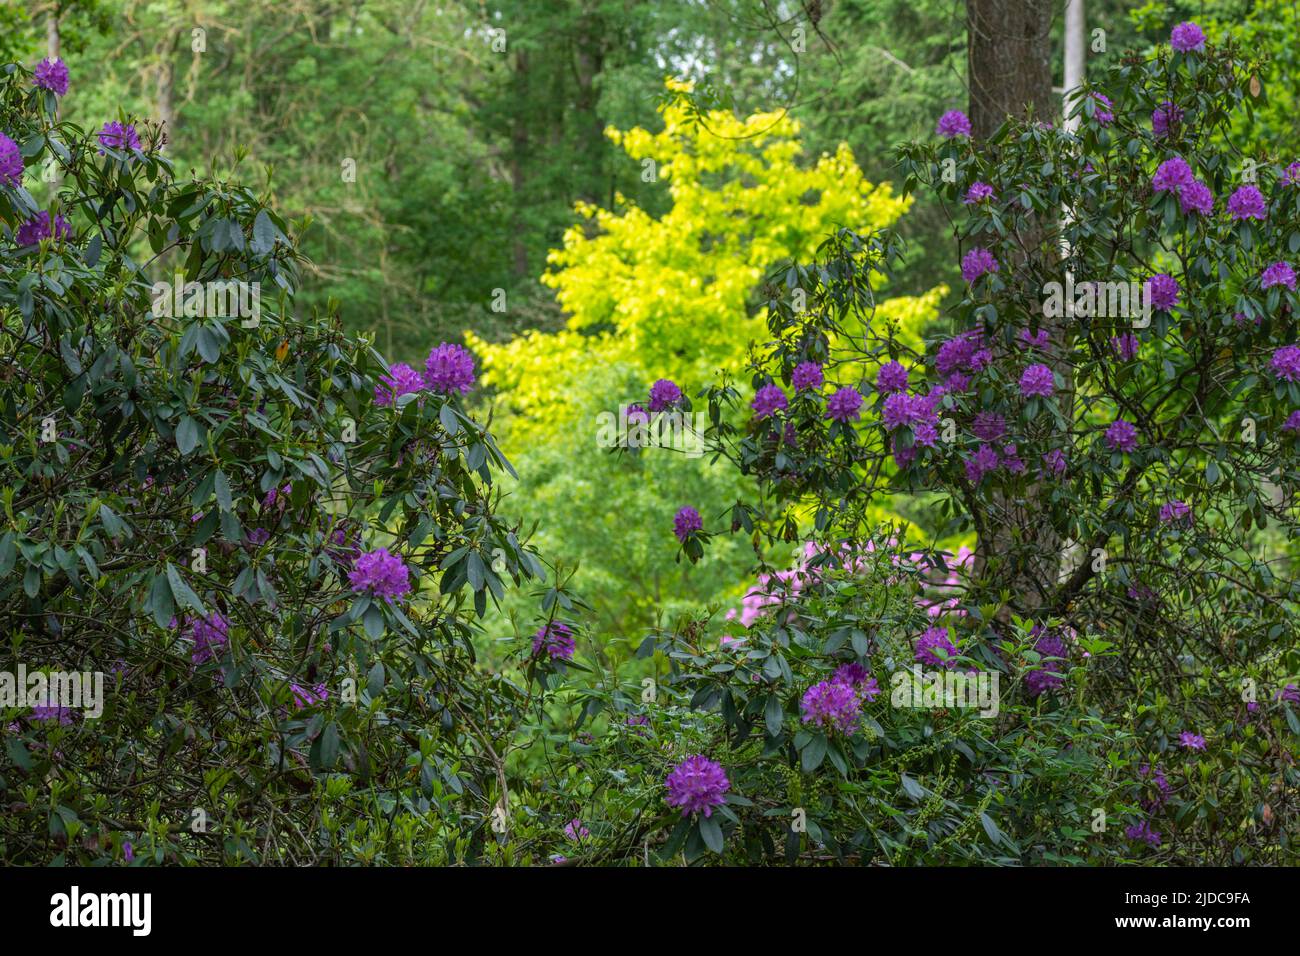 Cerise Rhododrendons in a woodland setting in the late spring with lime green leaves of a distant tree in the background Stock Photo